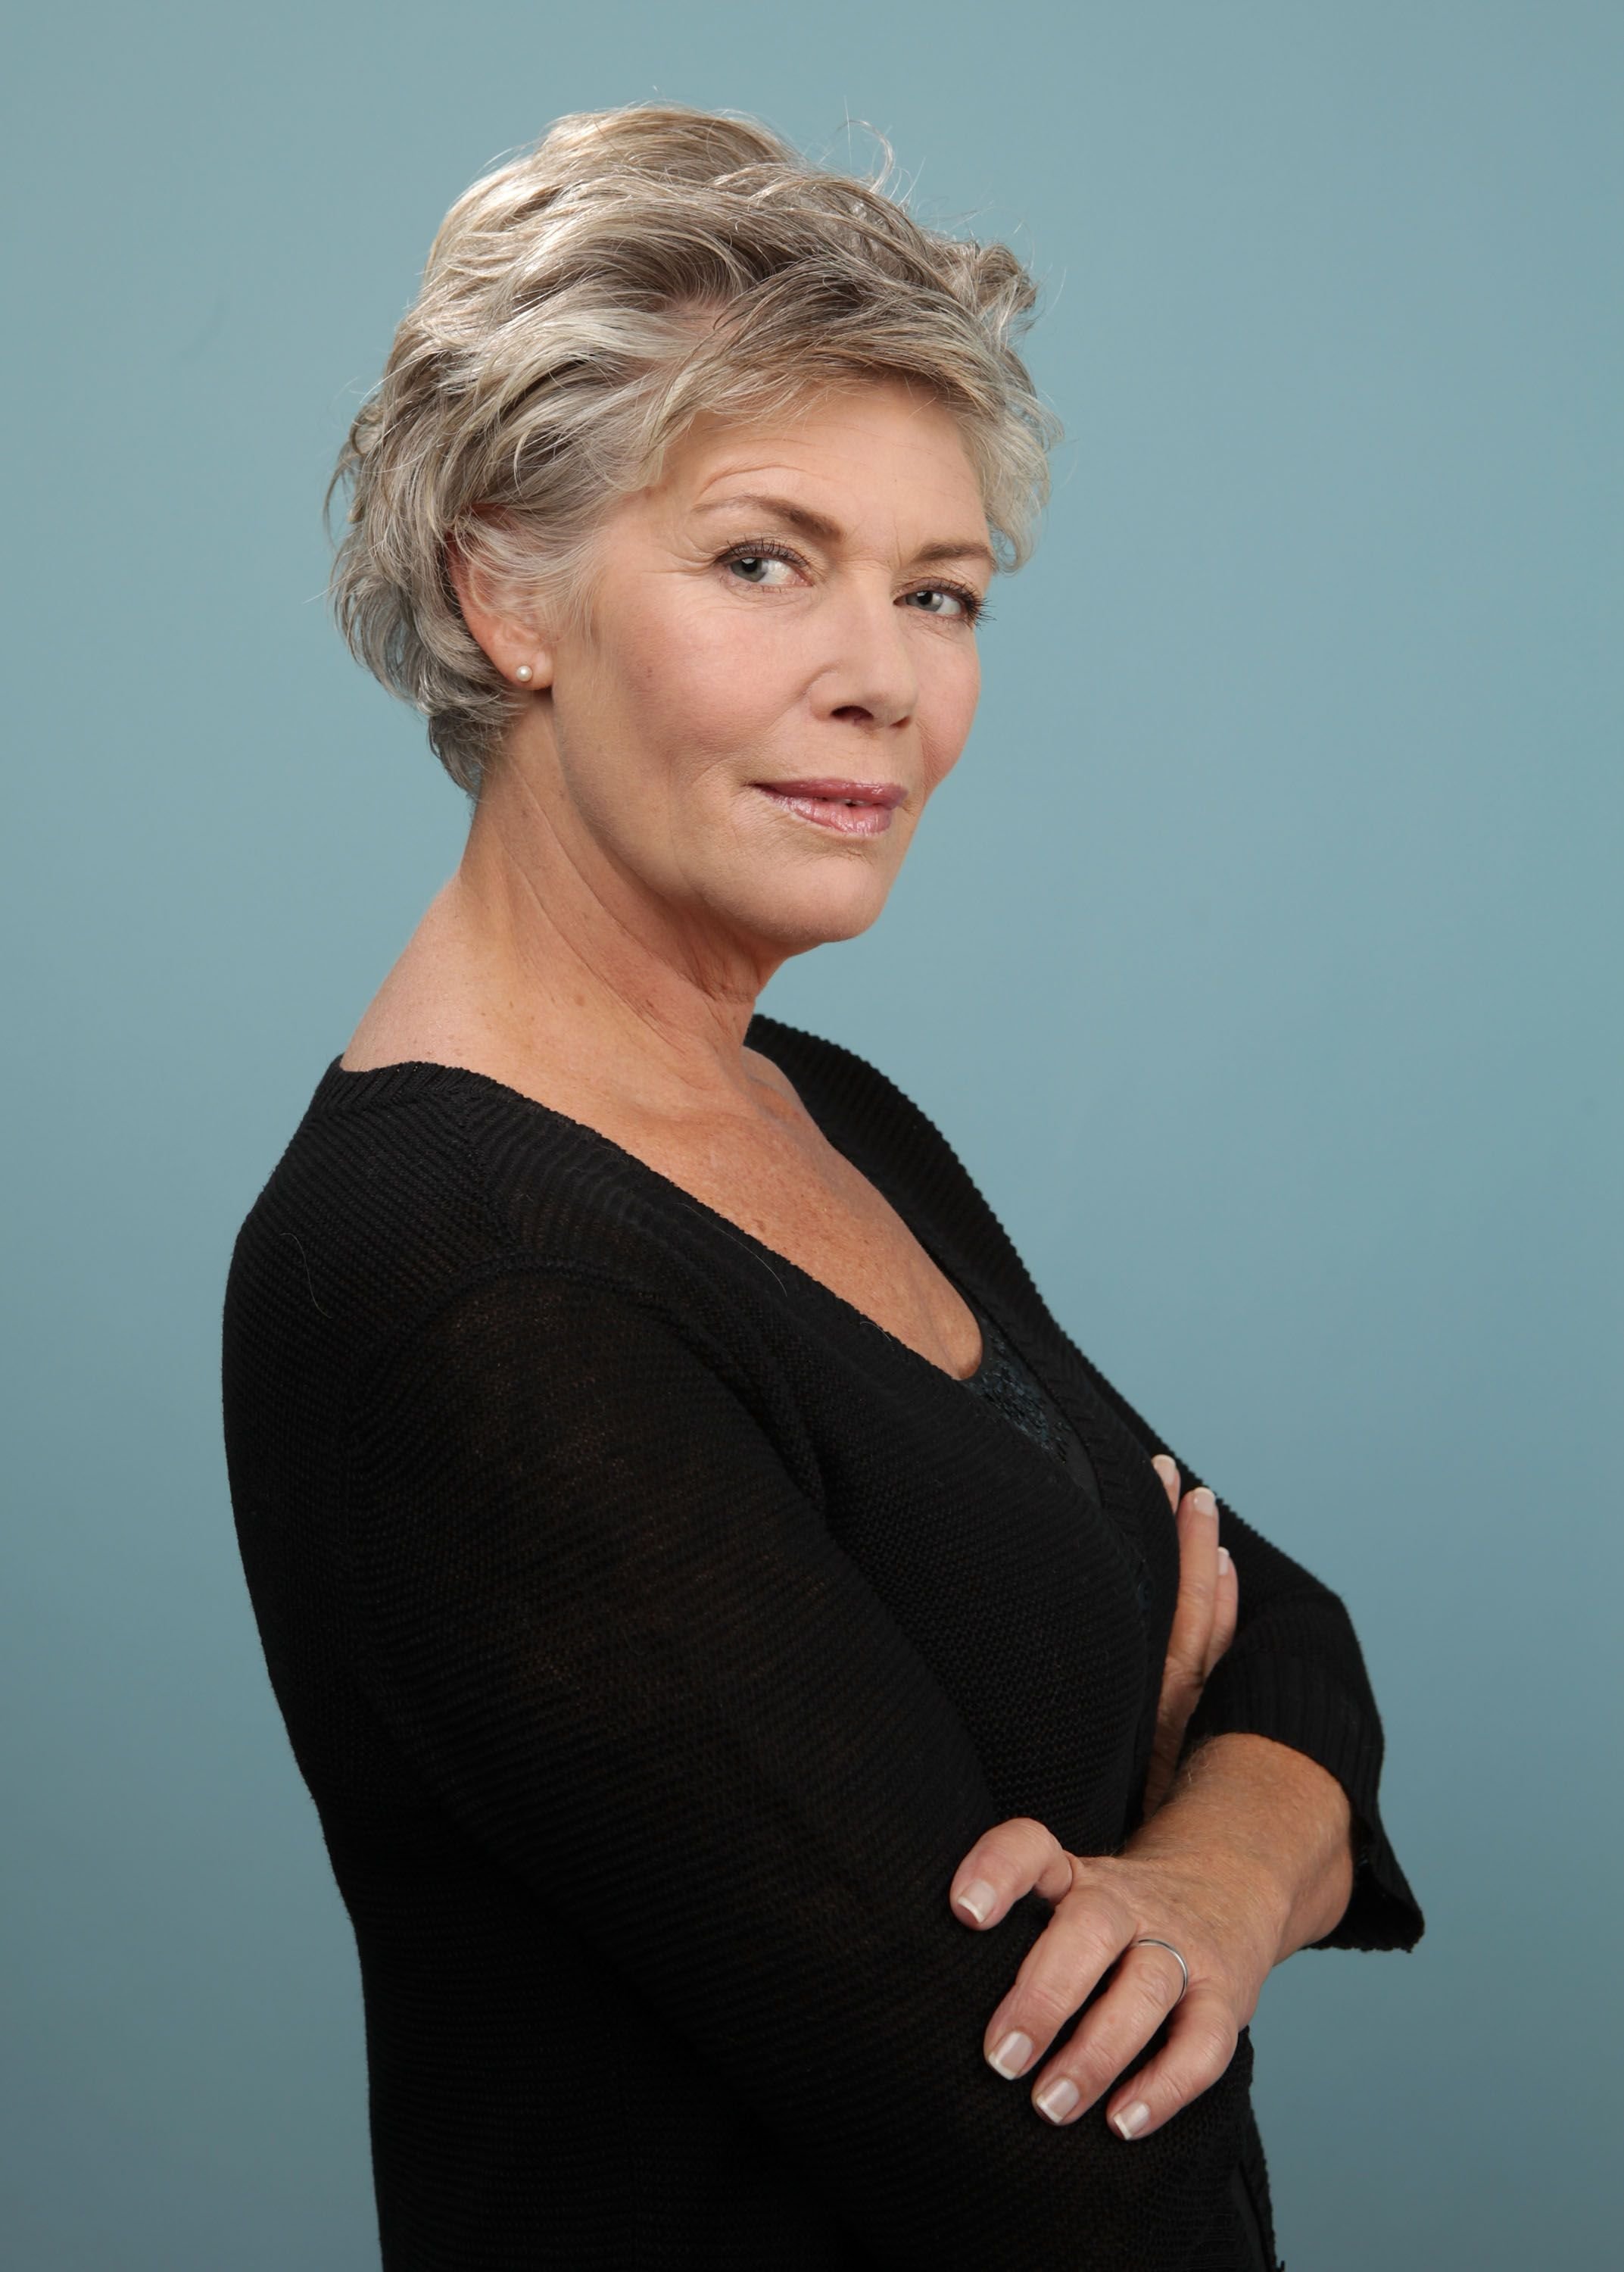 Kelly McGillis posing for a portrait during the 35th Toronto International Film Festival in Toronto, Canada | Photo: Matt Carr/Getty Images